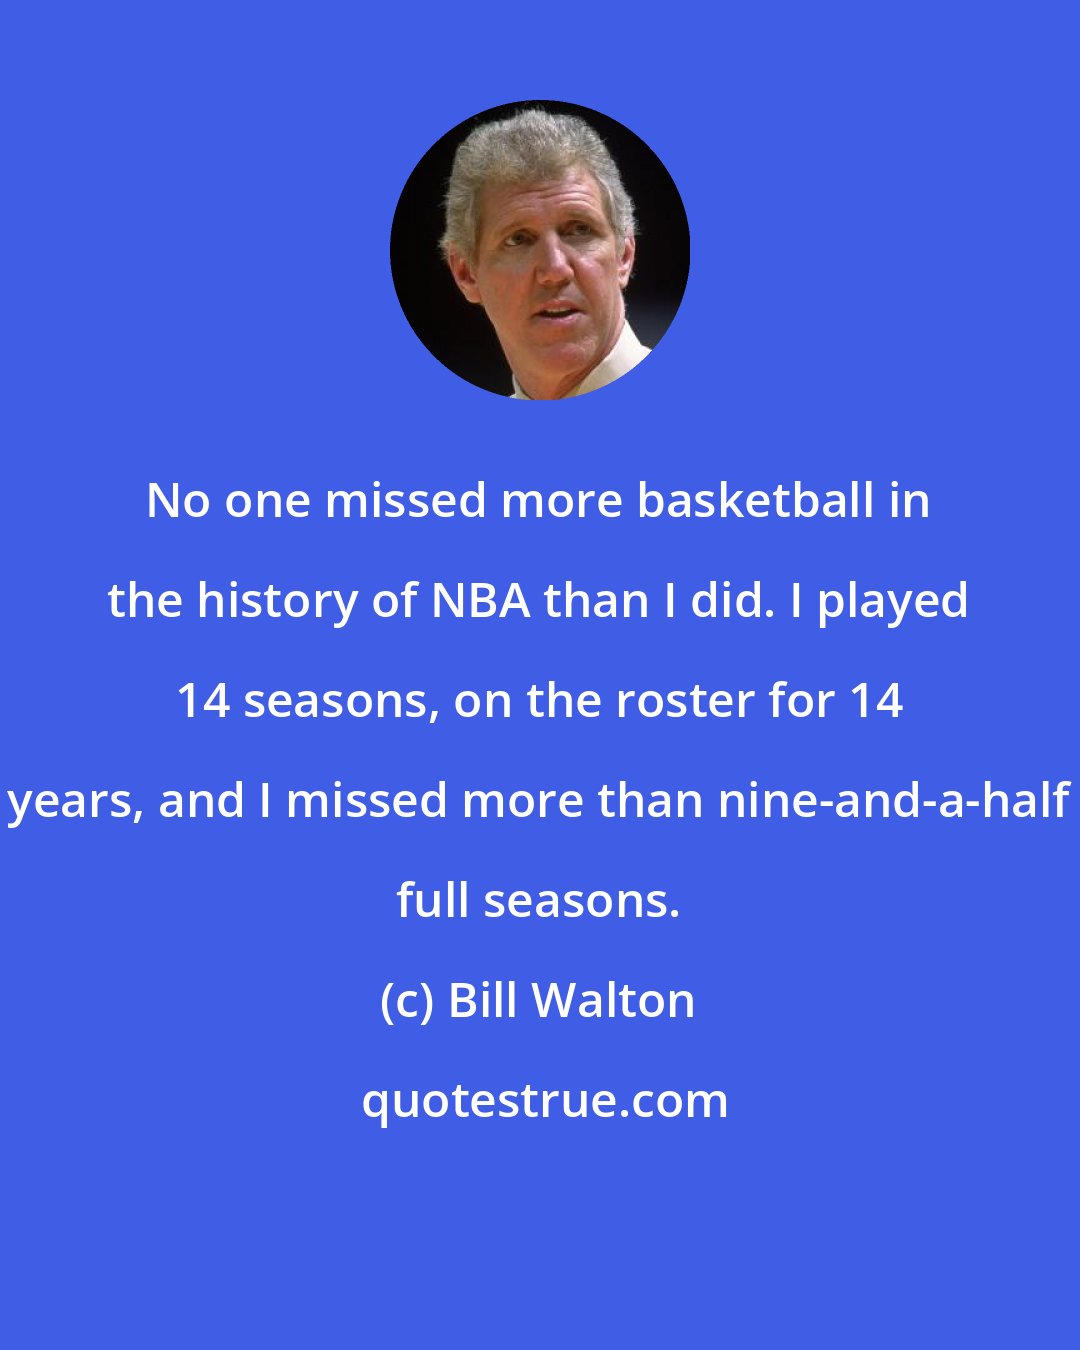 Bill Walton: No one missed more basketball in the history of NBA than I did. I played 14 seasons, on the roster for 14 years, and I missed more than nine-and-a-half full seasons.